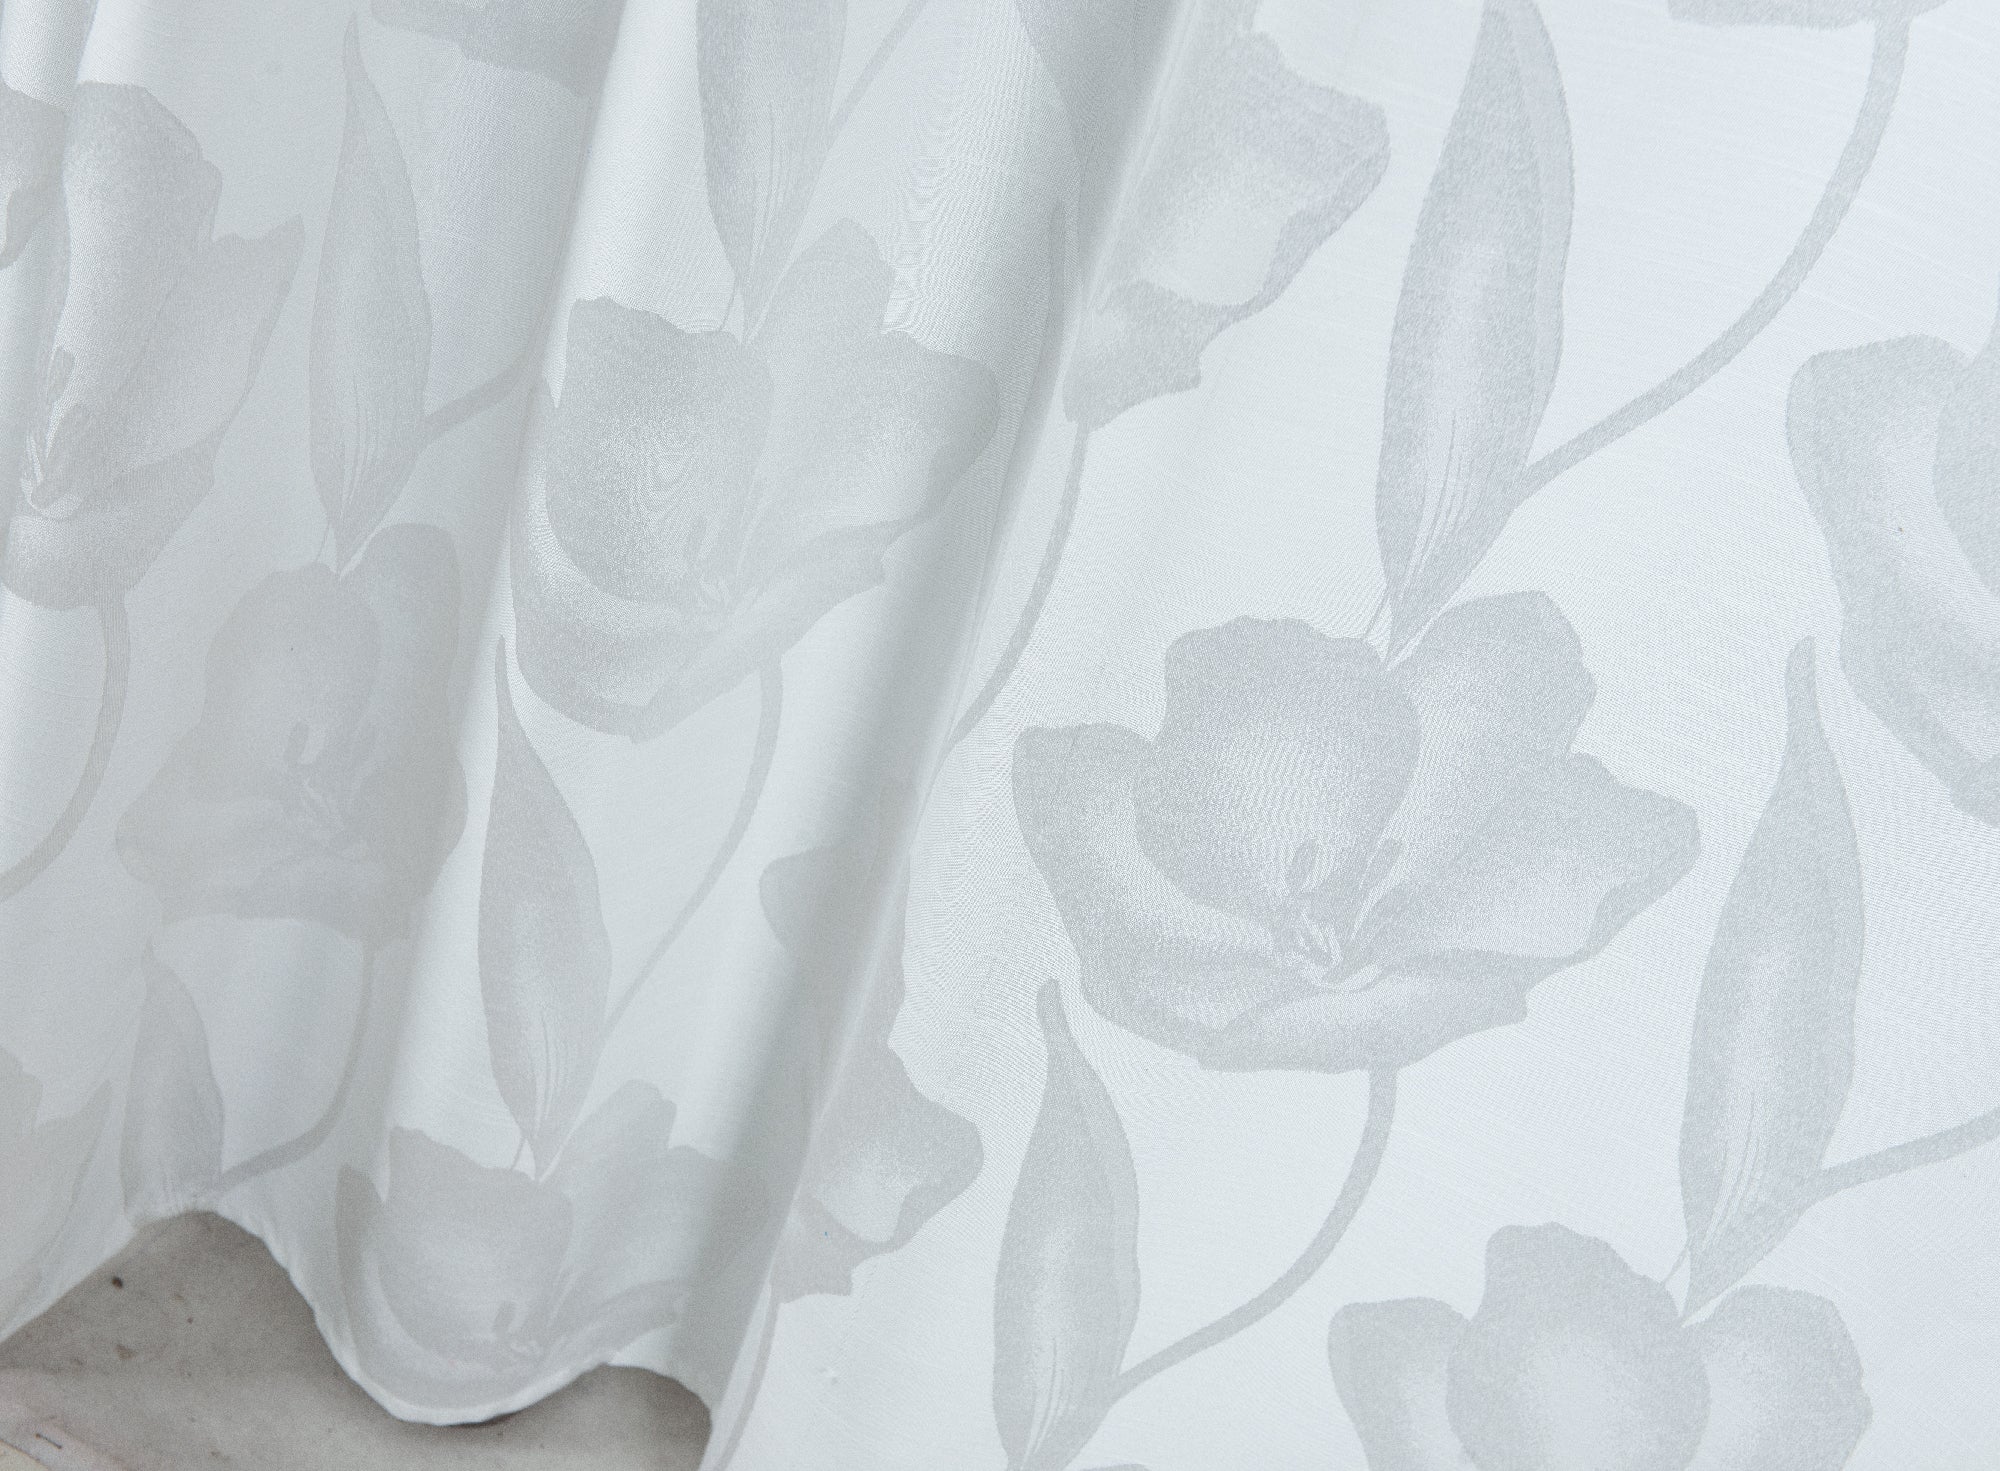 Dainty Home Lily 3D Floral Textured Weaved Lurex Floral Designed Fabric Shower Curtain